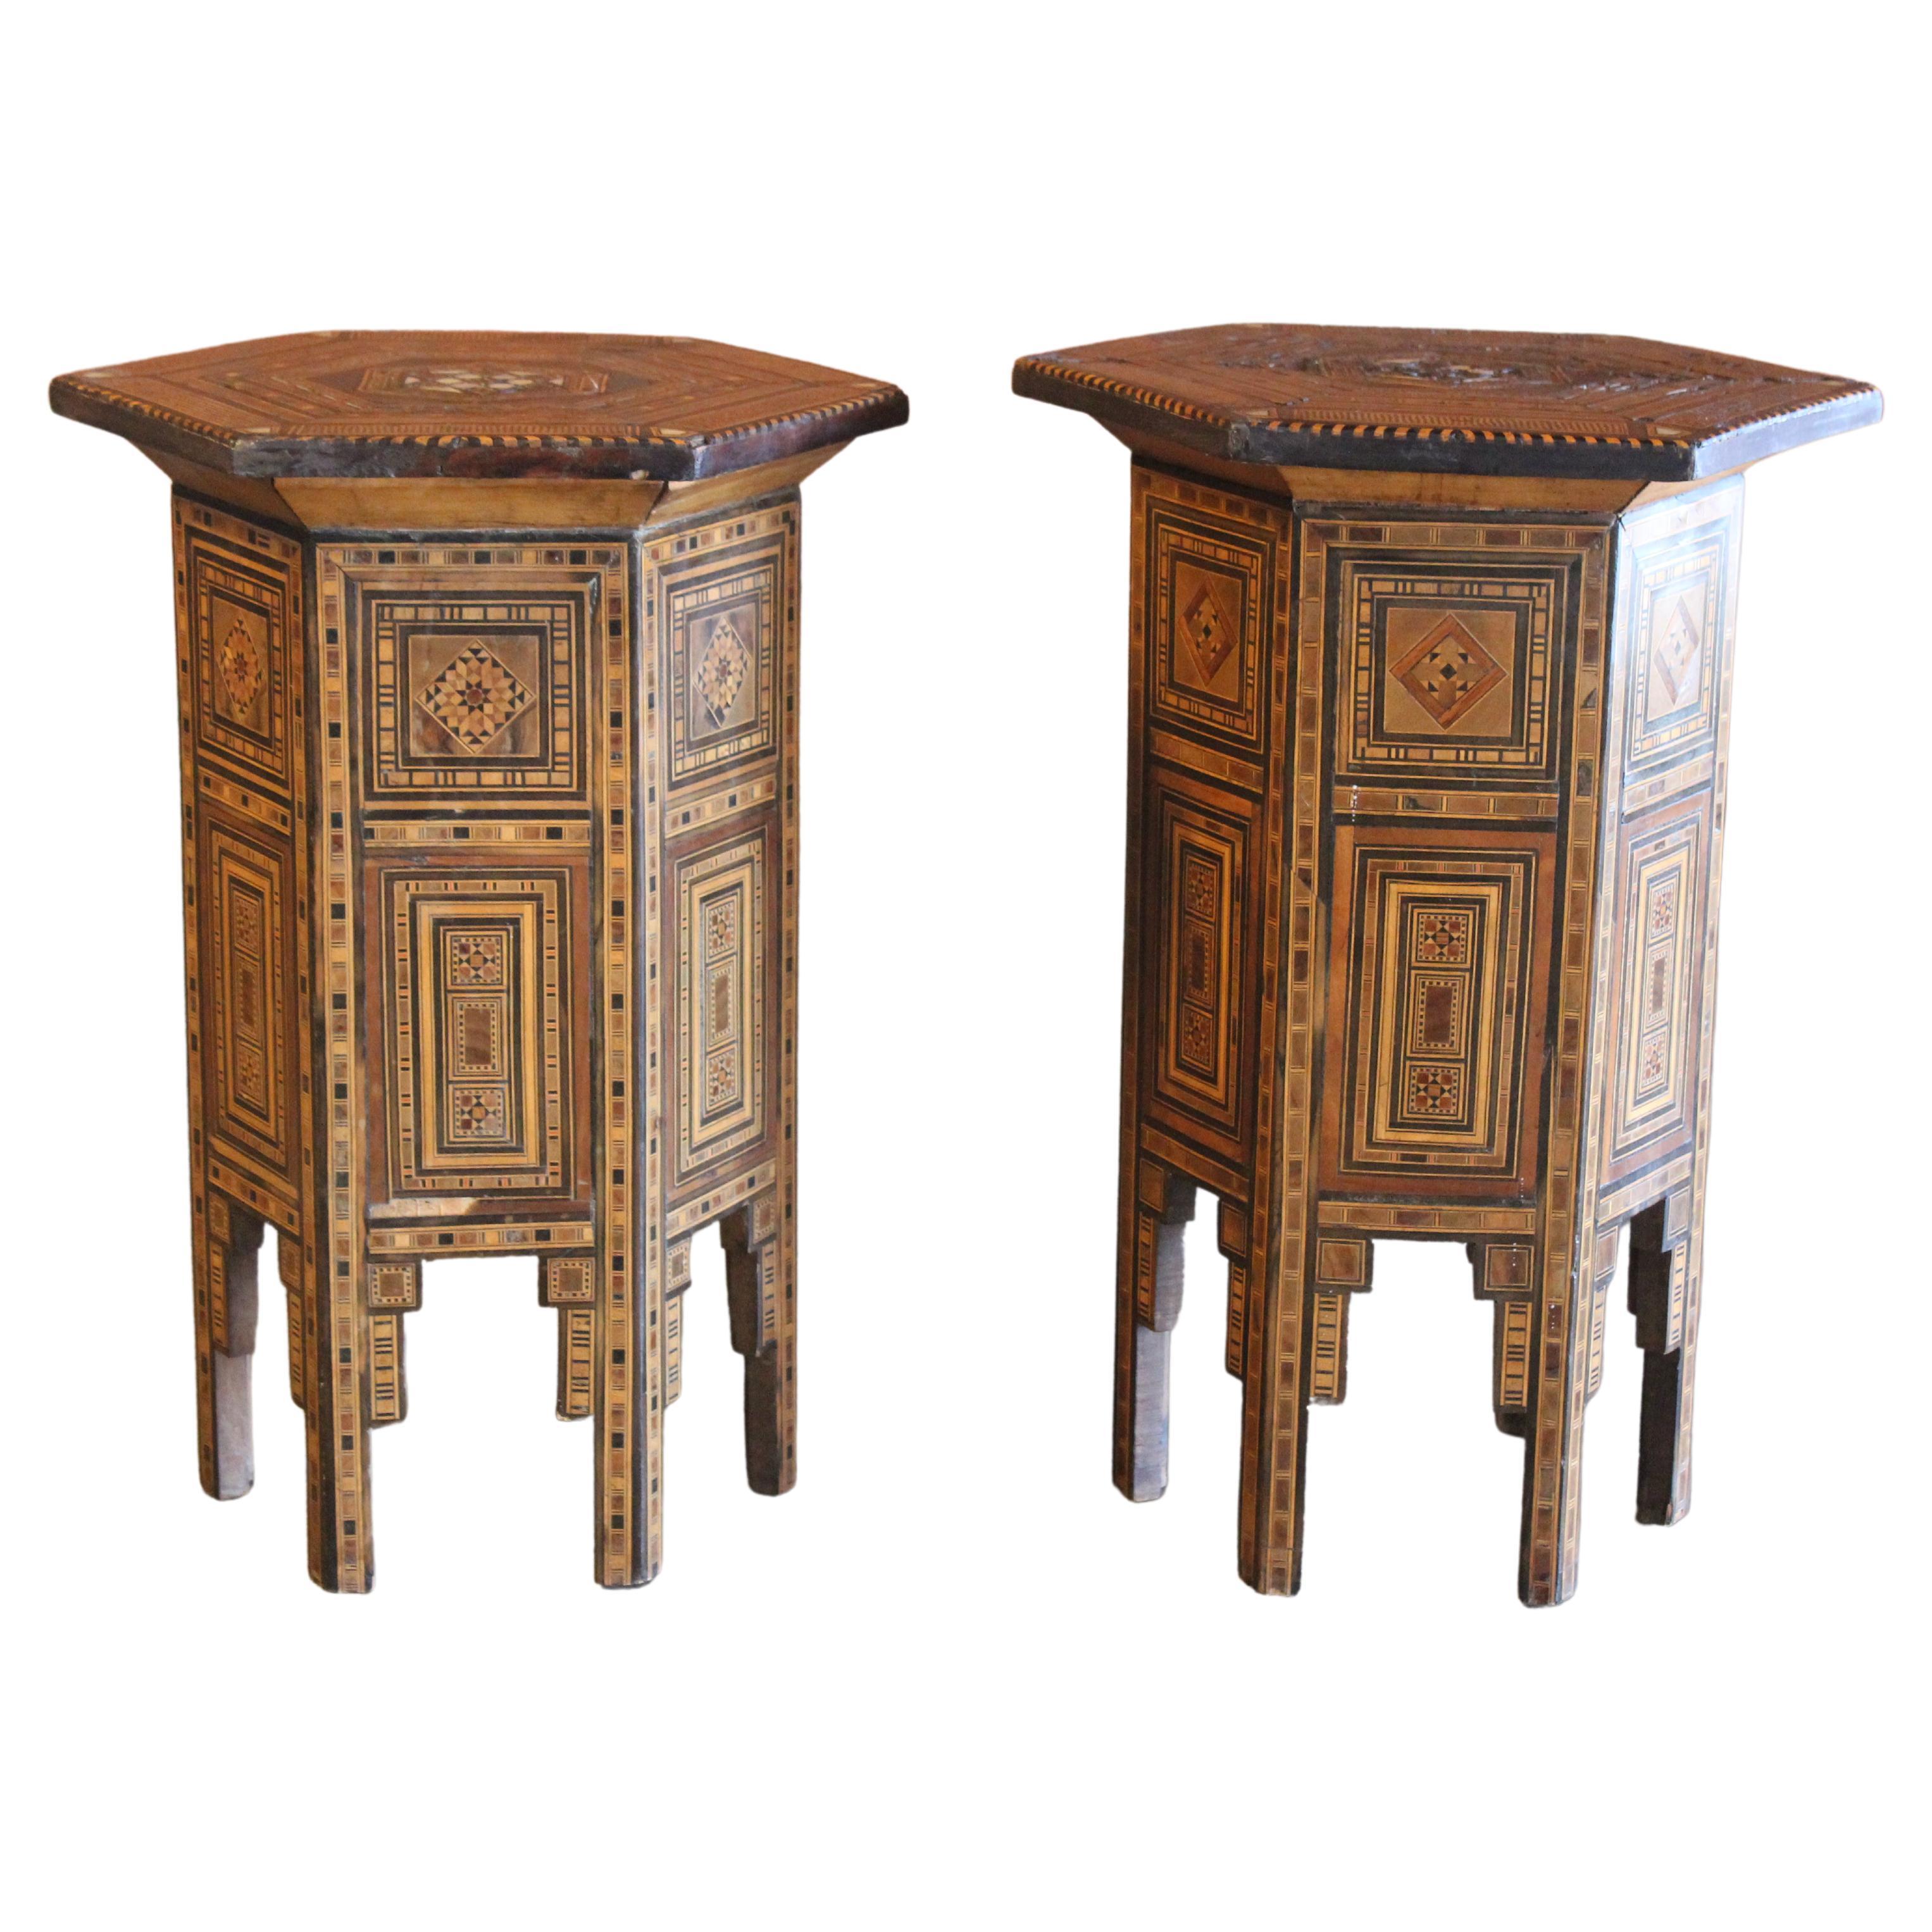 Pair of Antique Syrian Inlaid Side Tables